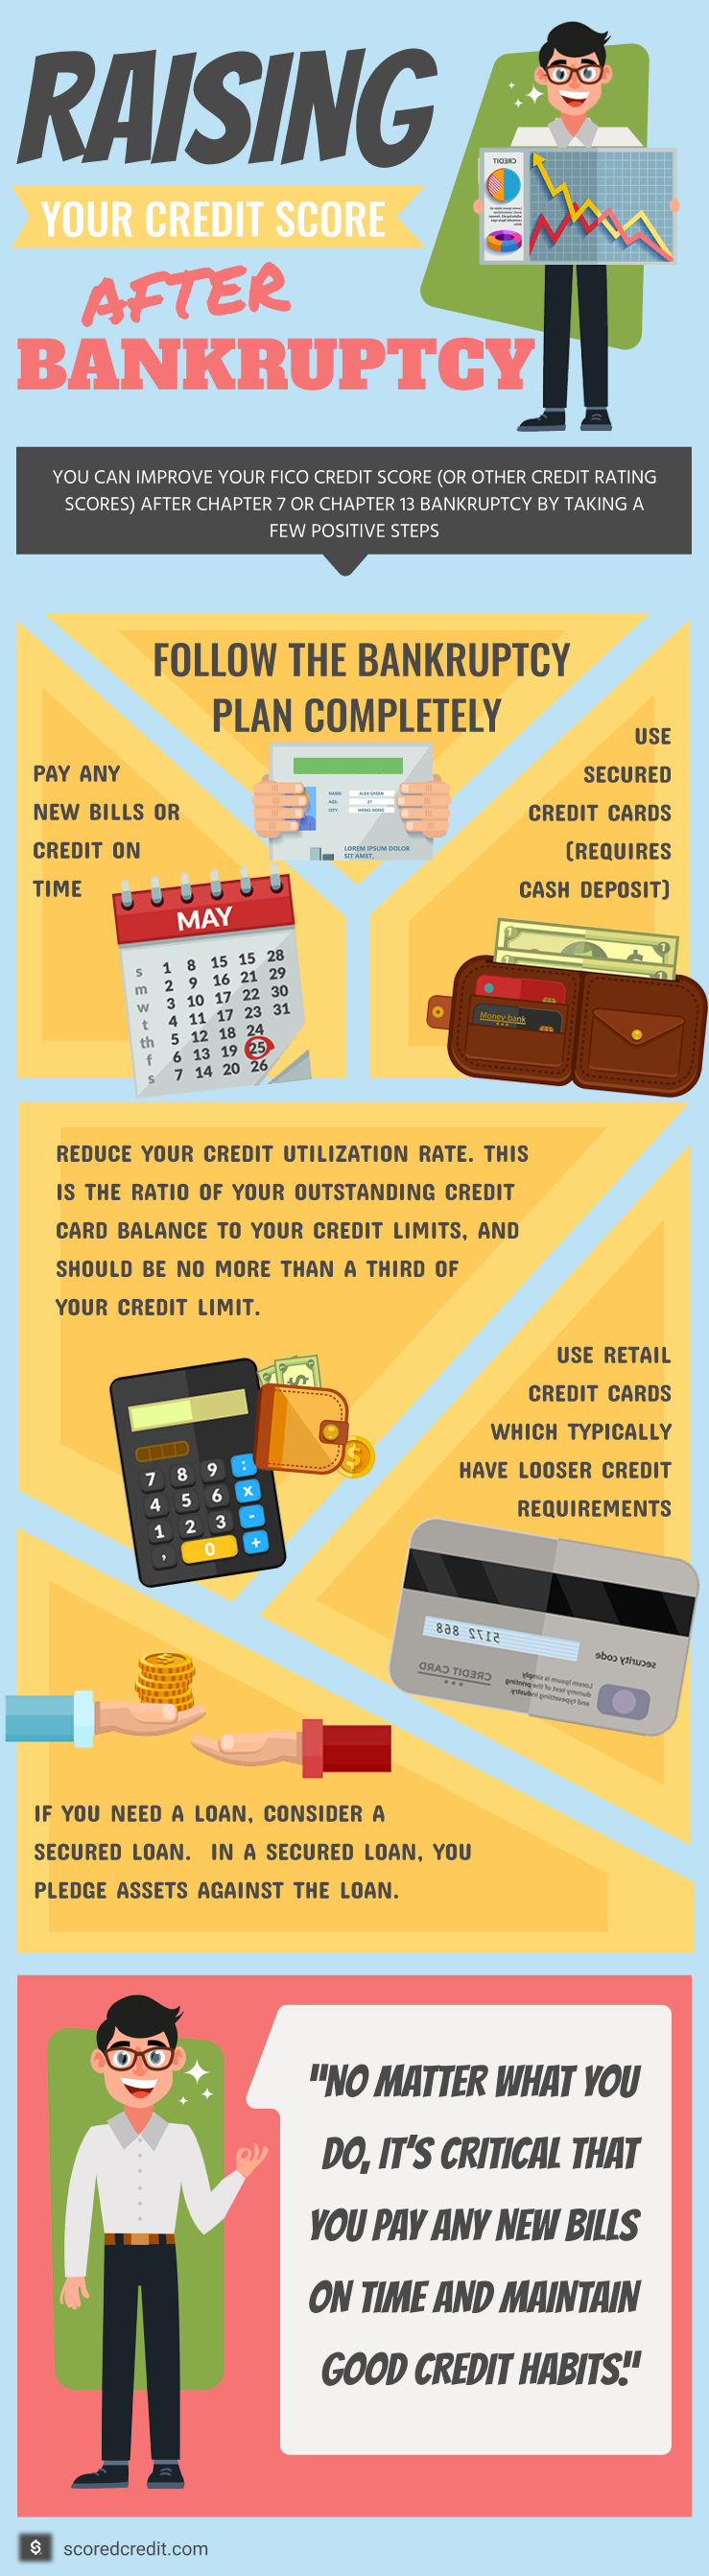 Raising Your Credit Score After Bankruptcy